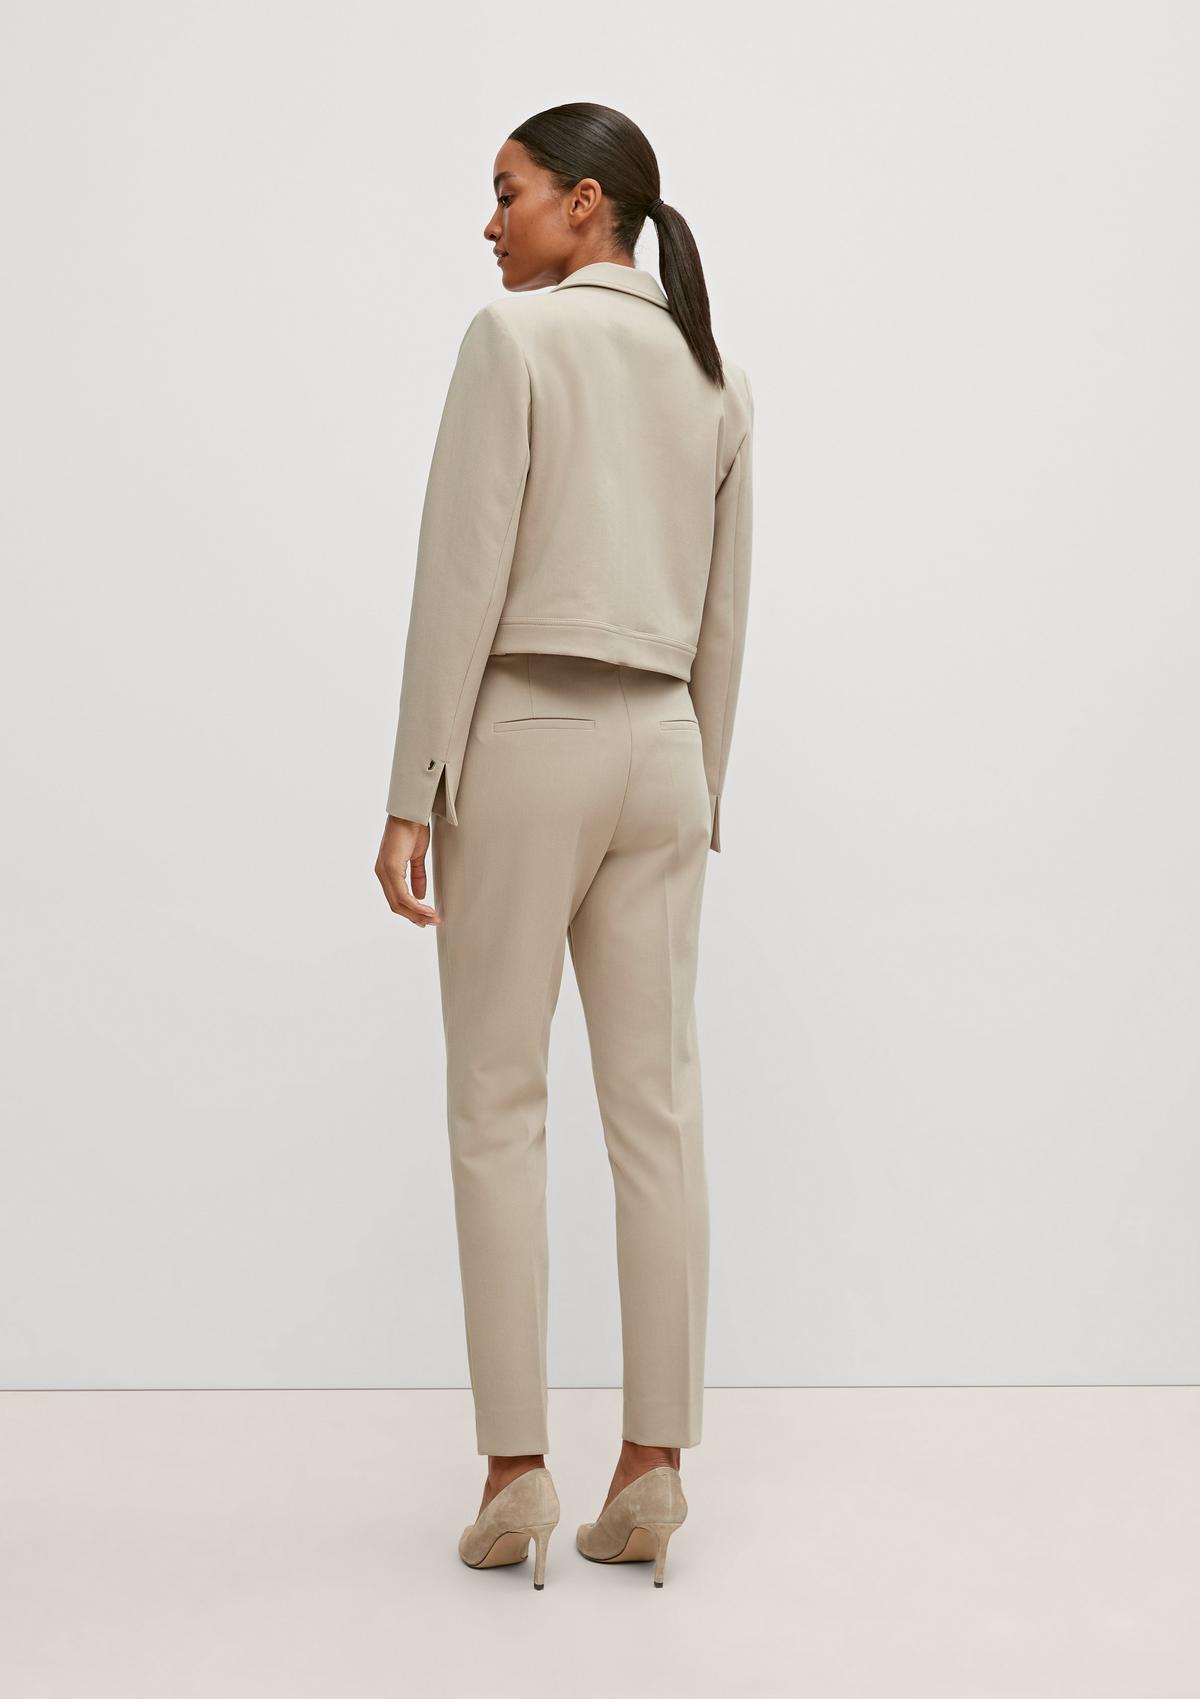 Trouser suits – stylish and elegant